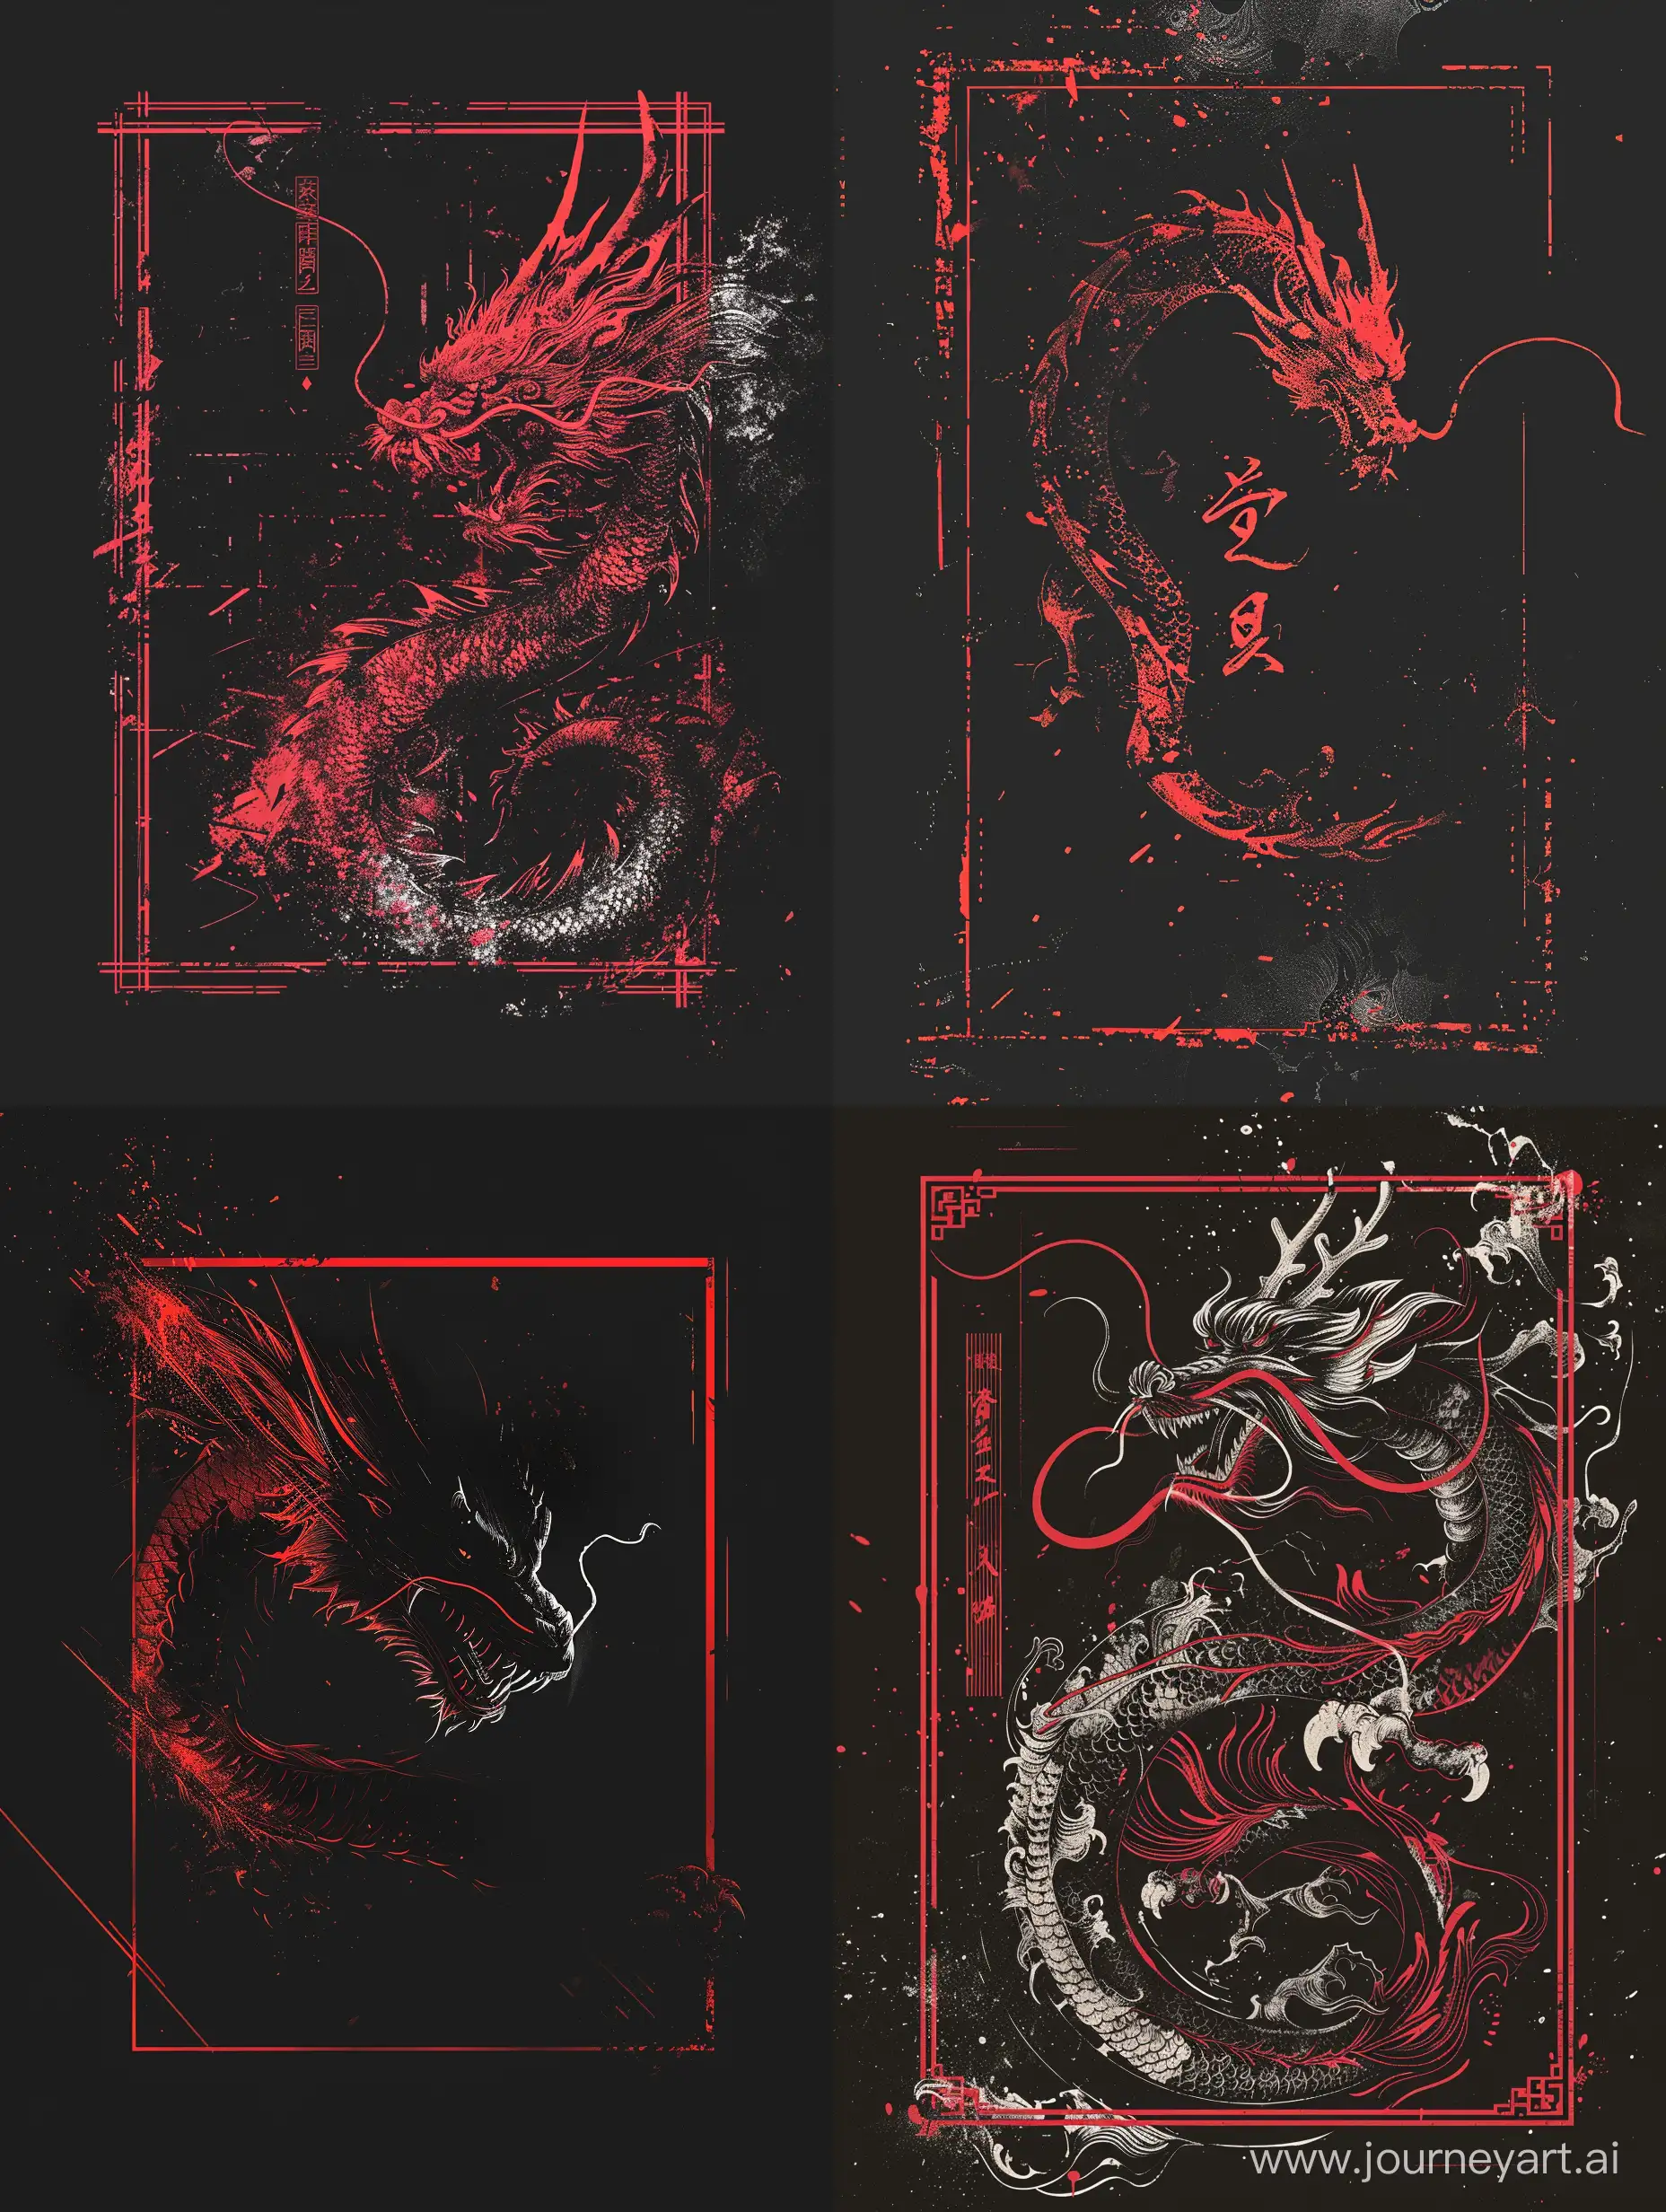 Create a rebellious atmosphere for the cover design by using a black background with a red frame. Incorporate an impactful symbol or pattern instead of text. This symbol or pattern could be, for example, a dragon figure or a rebellious character. Ensure the overall look of the design resembles an Instagram post.